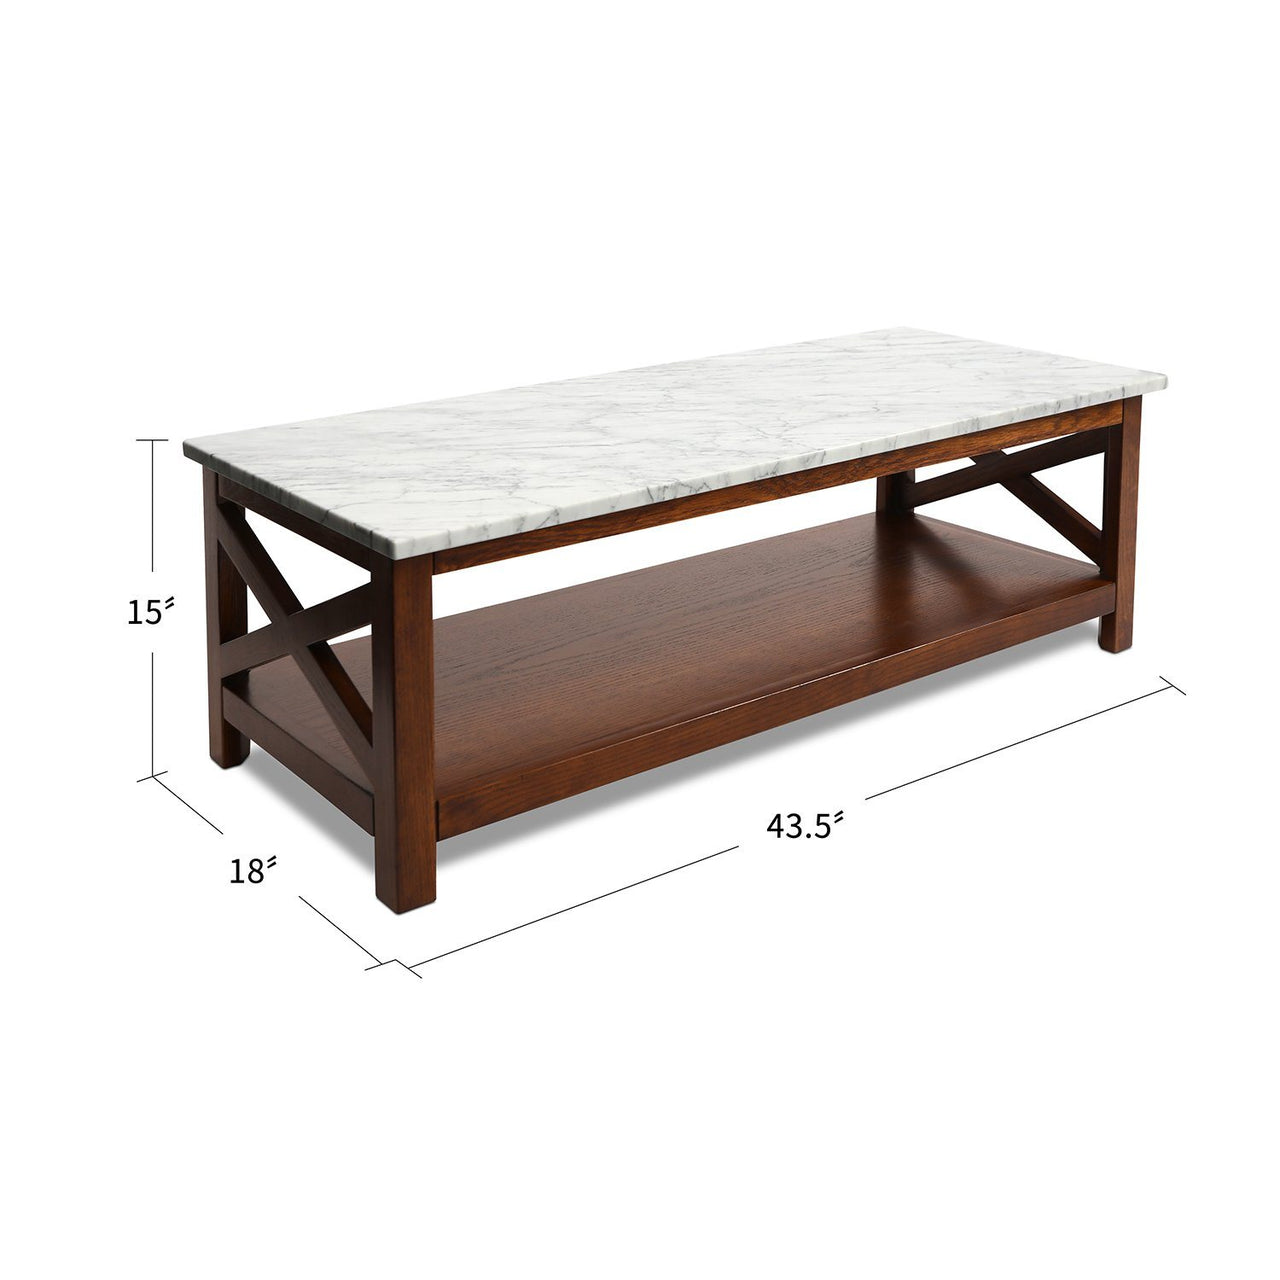 Agatha 44" Rectangular Italian Carrara White Marble Coffee Table with Color Solid Wood Legs Writing Desk The Bianco Collection 